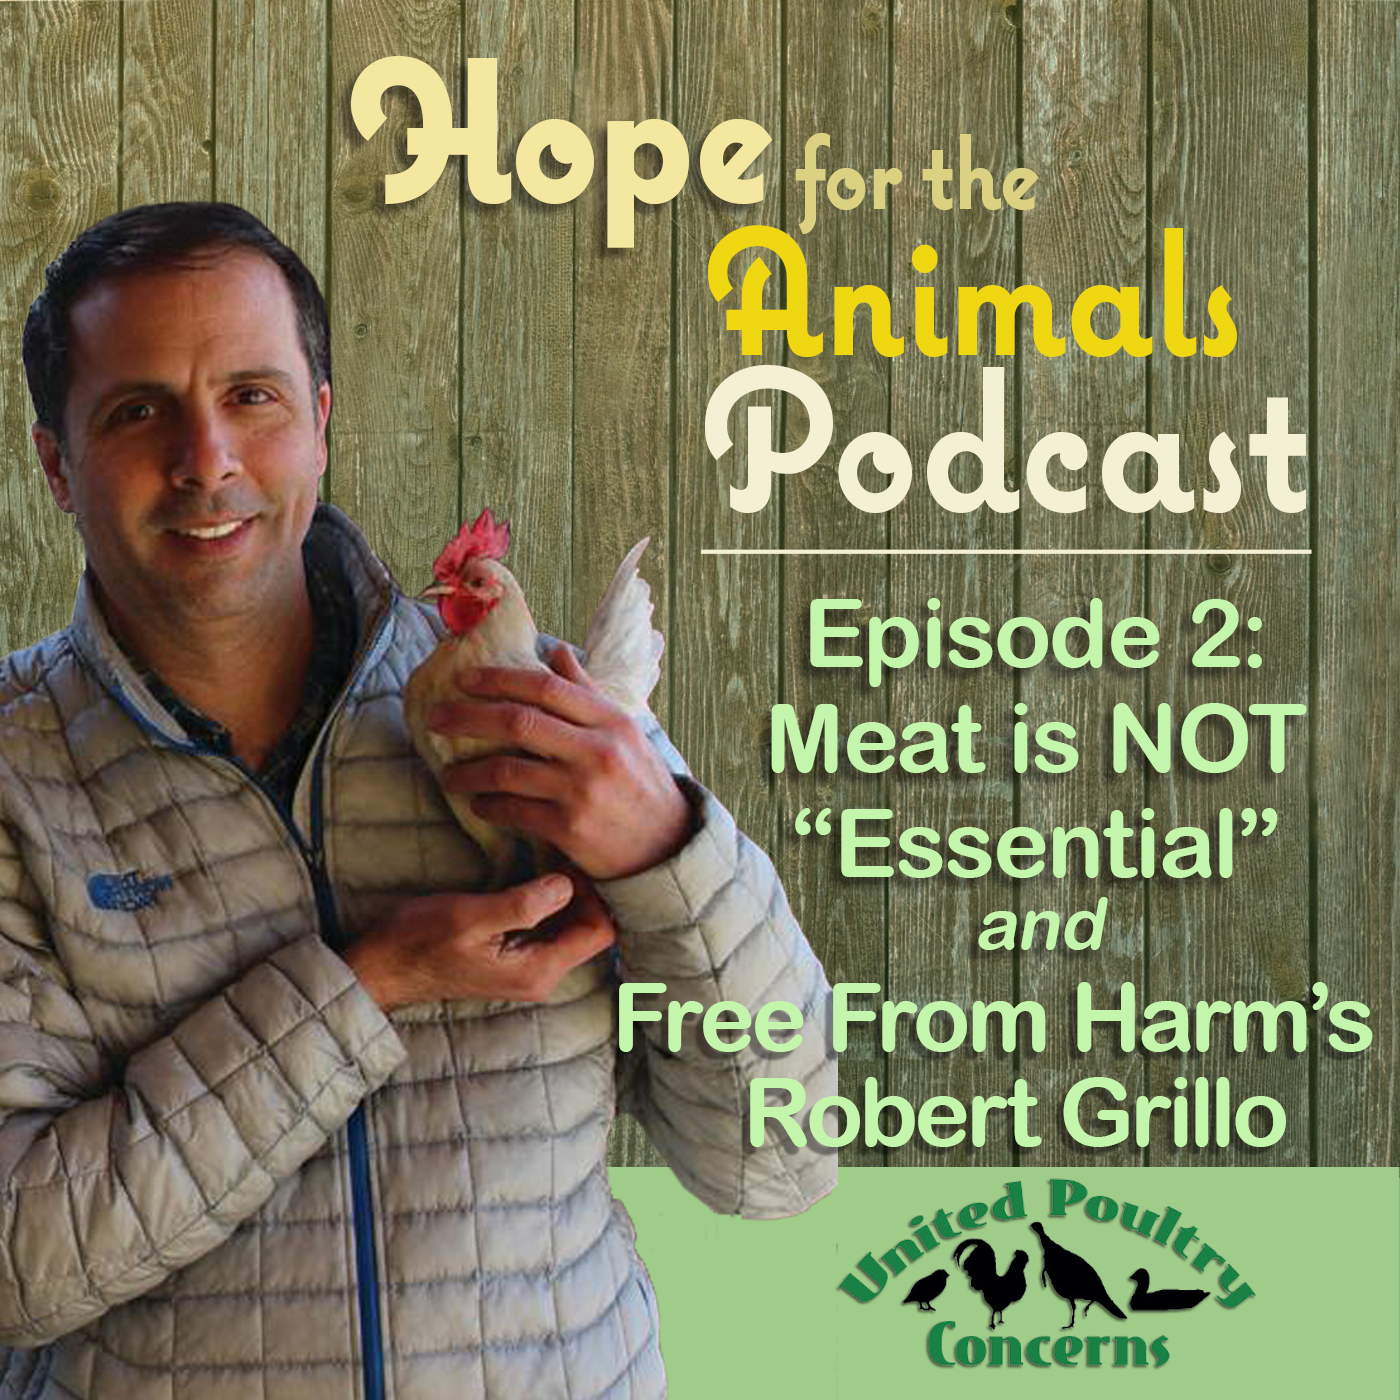 Episode 2: Meat is NOT “Essential” and Free From Harm’s Robert Grillo